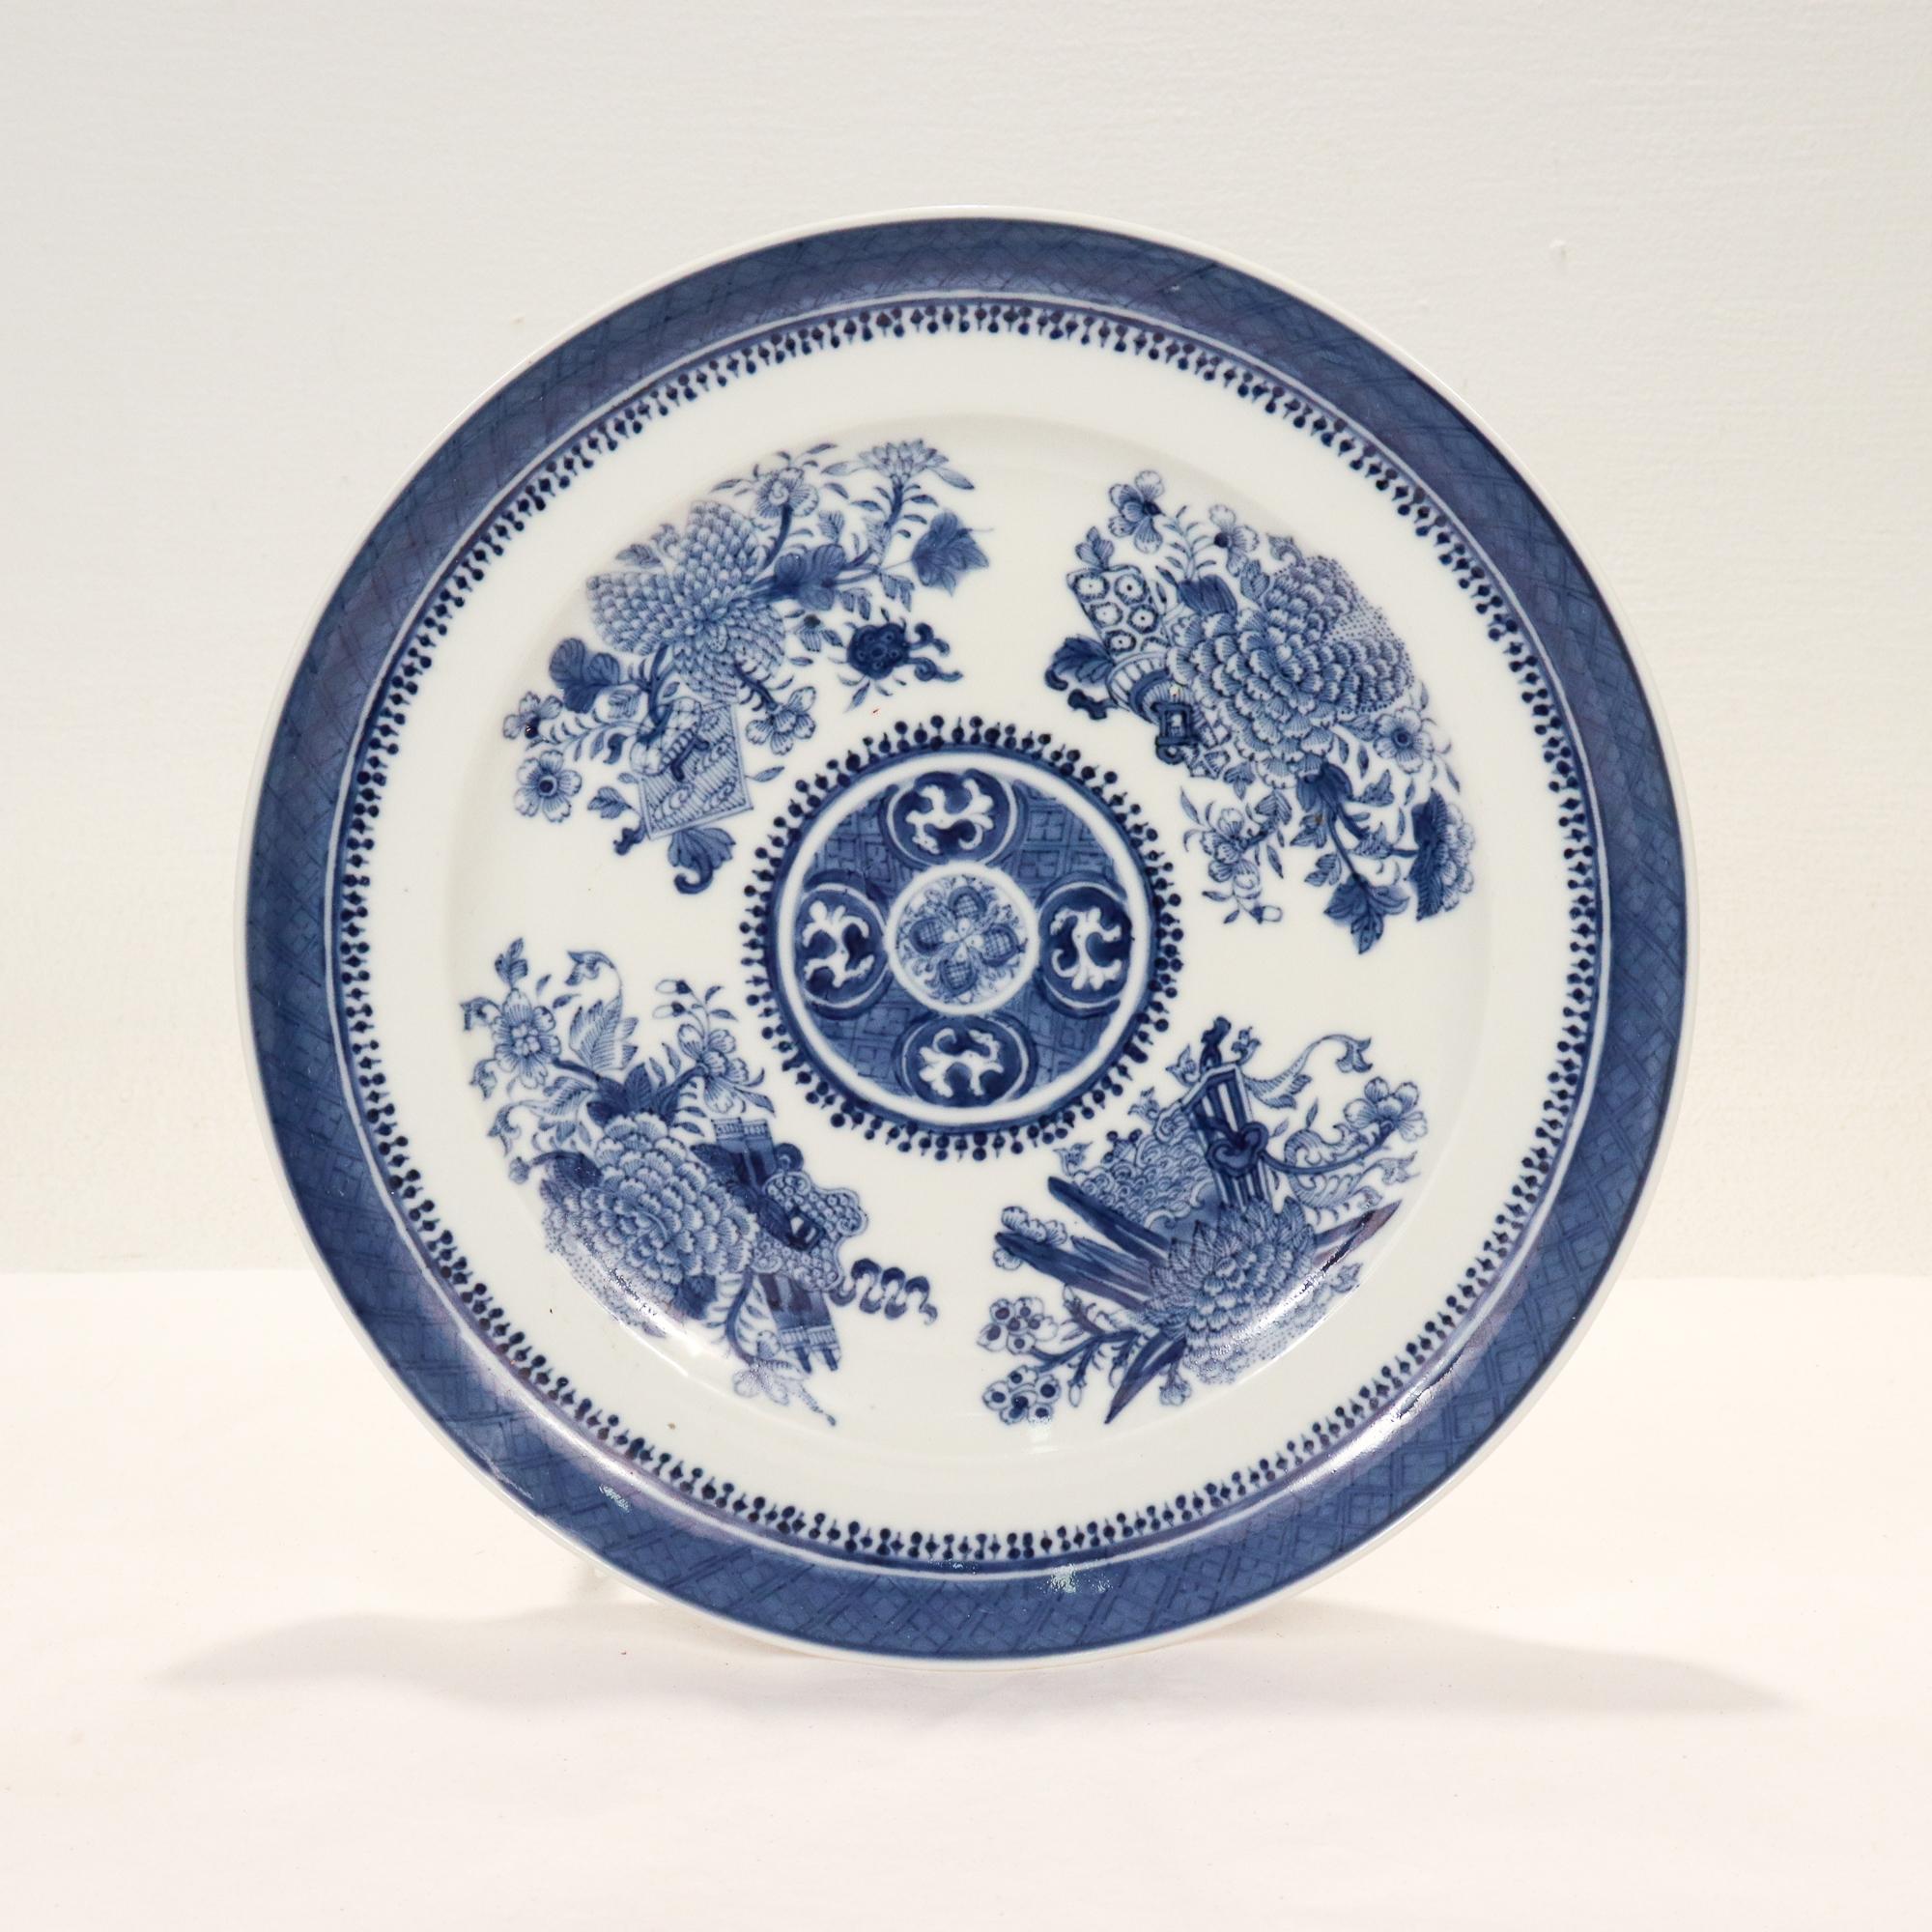 A fine antique Chinese Export porcelain plate in the Fitzhugh pattern.

Decorated in underglaze blue with floral devices to the face, and a border to the rim with a repeating diamond fretwork pattern.

Simply a great Chinese Export